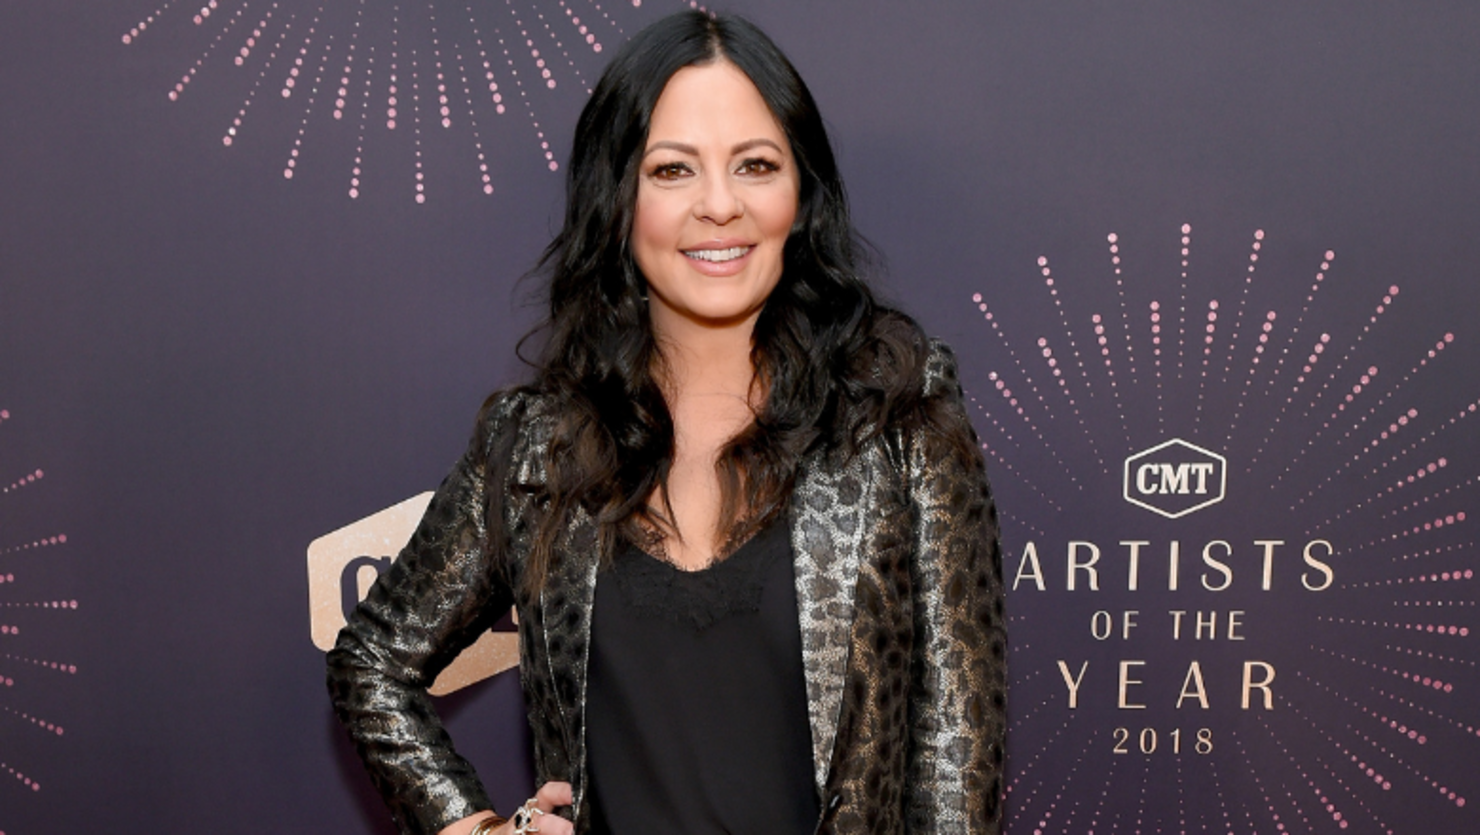 Sara Evans Mourns The Death Of Her Father Jack: 'I Will Miss You So Much'